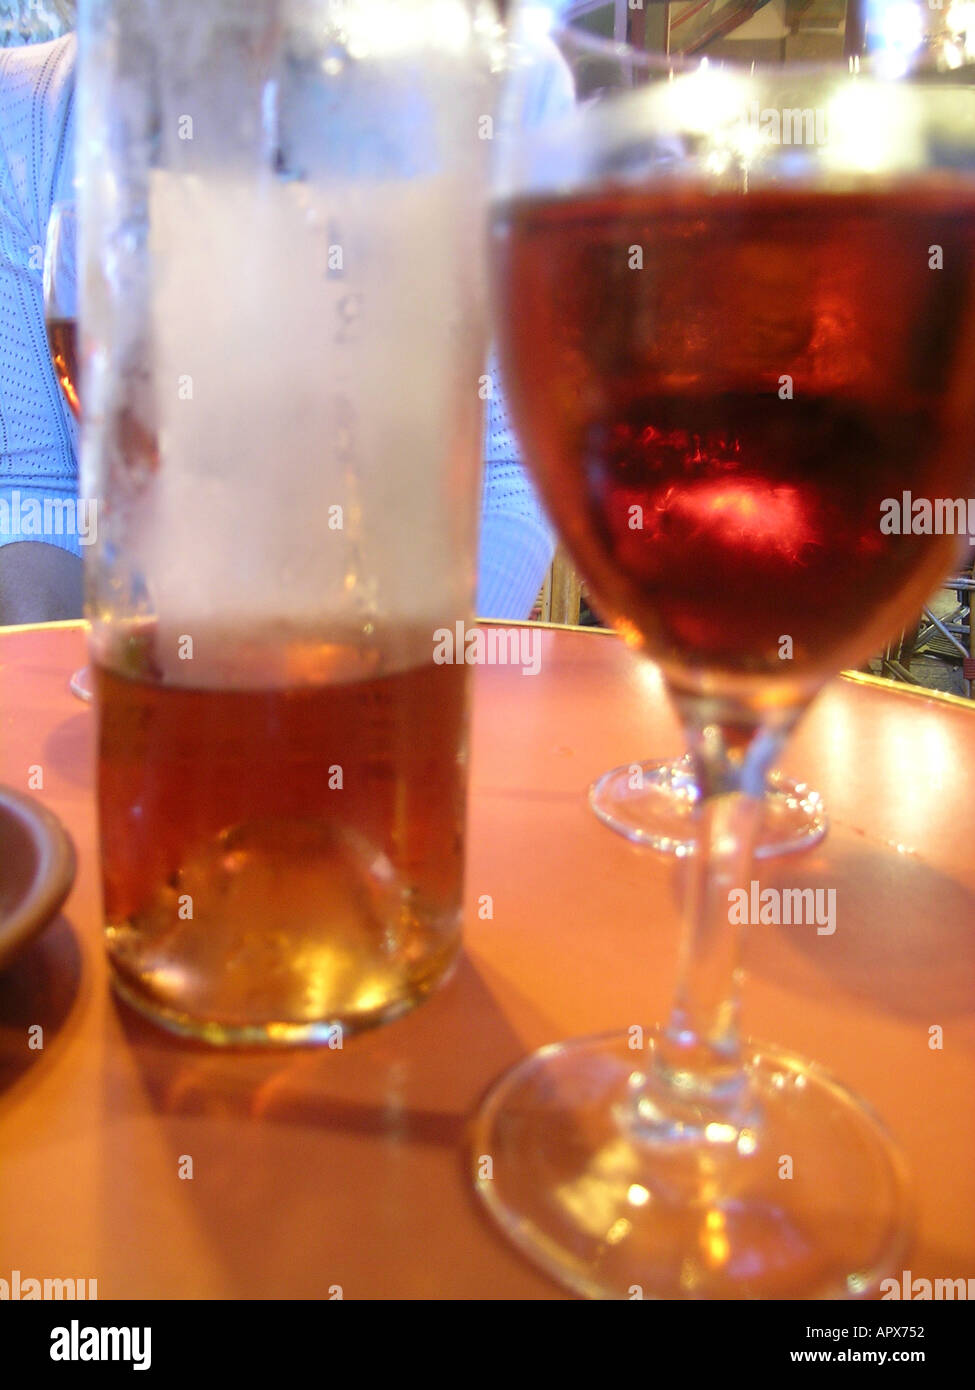 drinks - glass of wine & beer on bar table Stock Photo